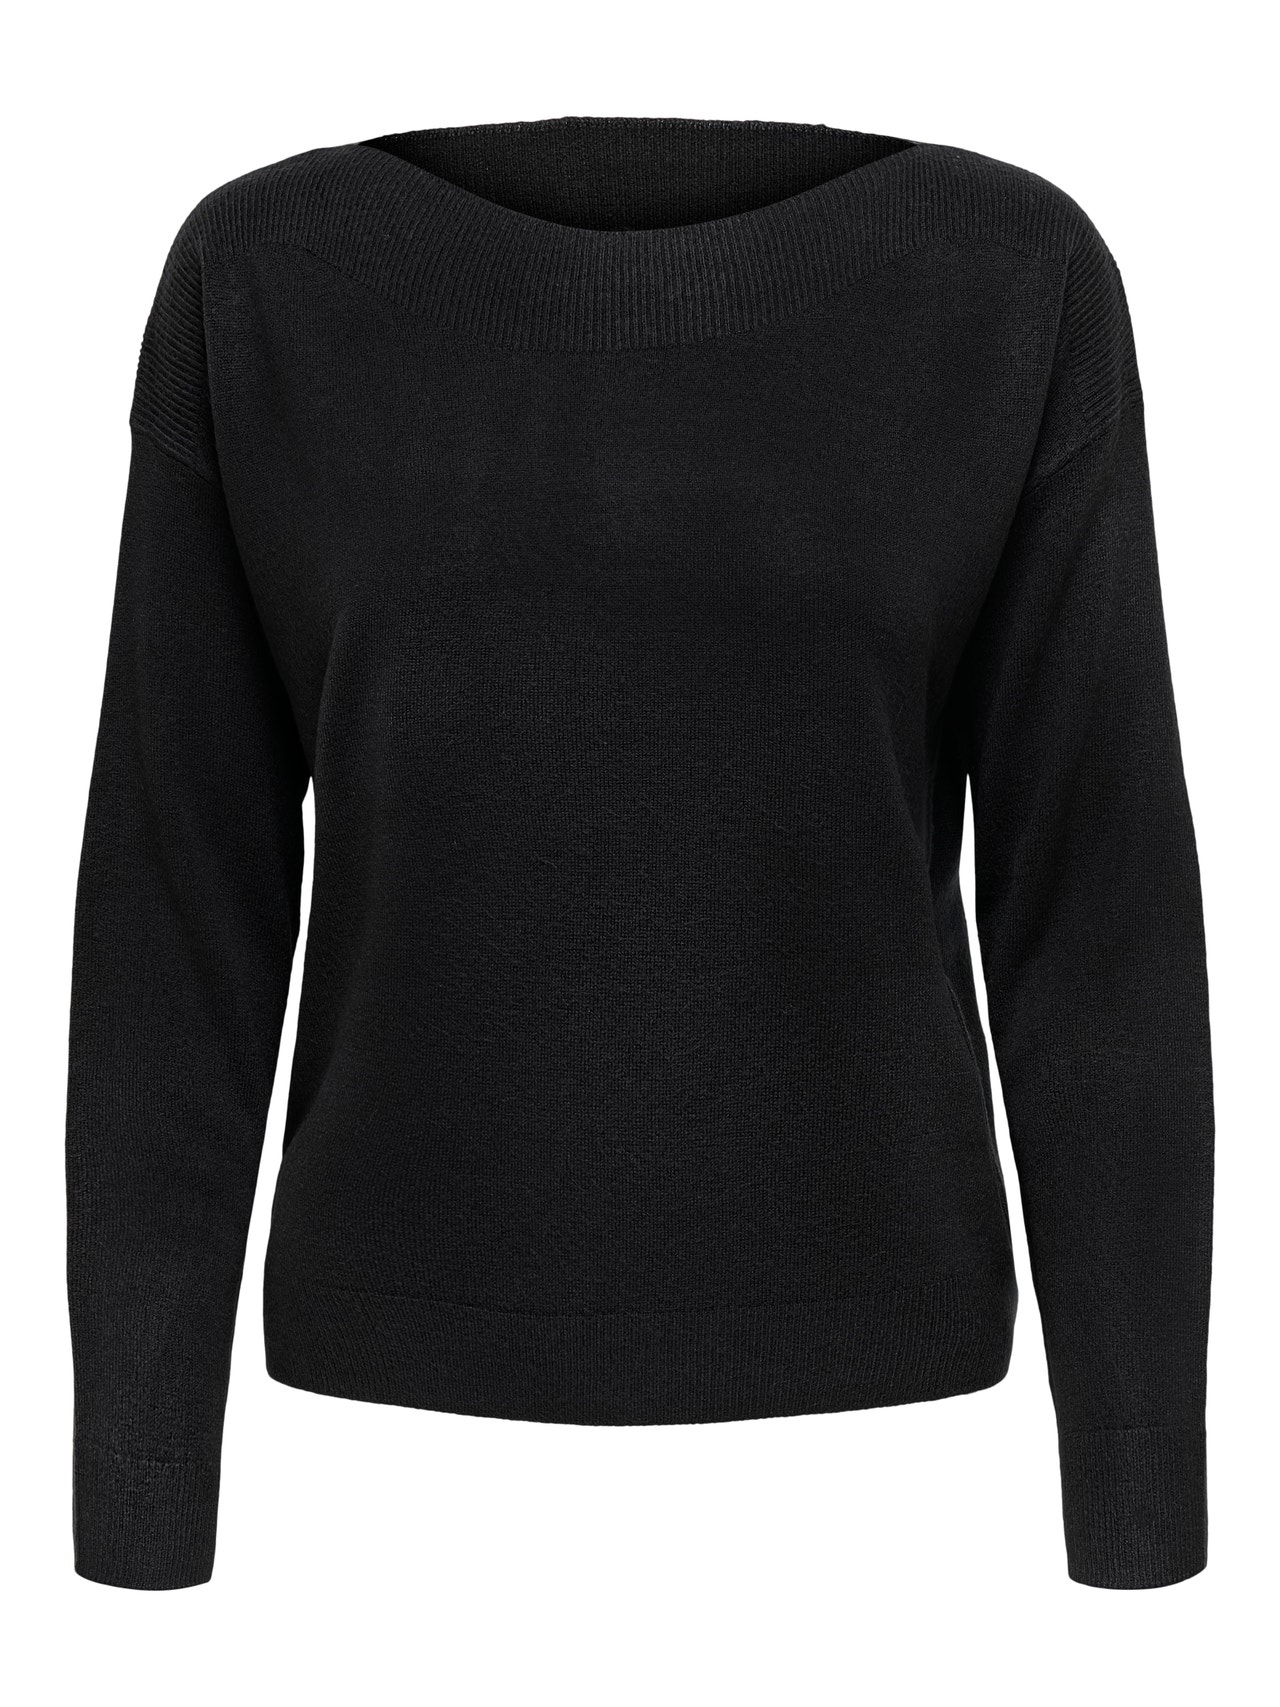 ONLY Tall Boatneck knitted pullover -Black - 15276563